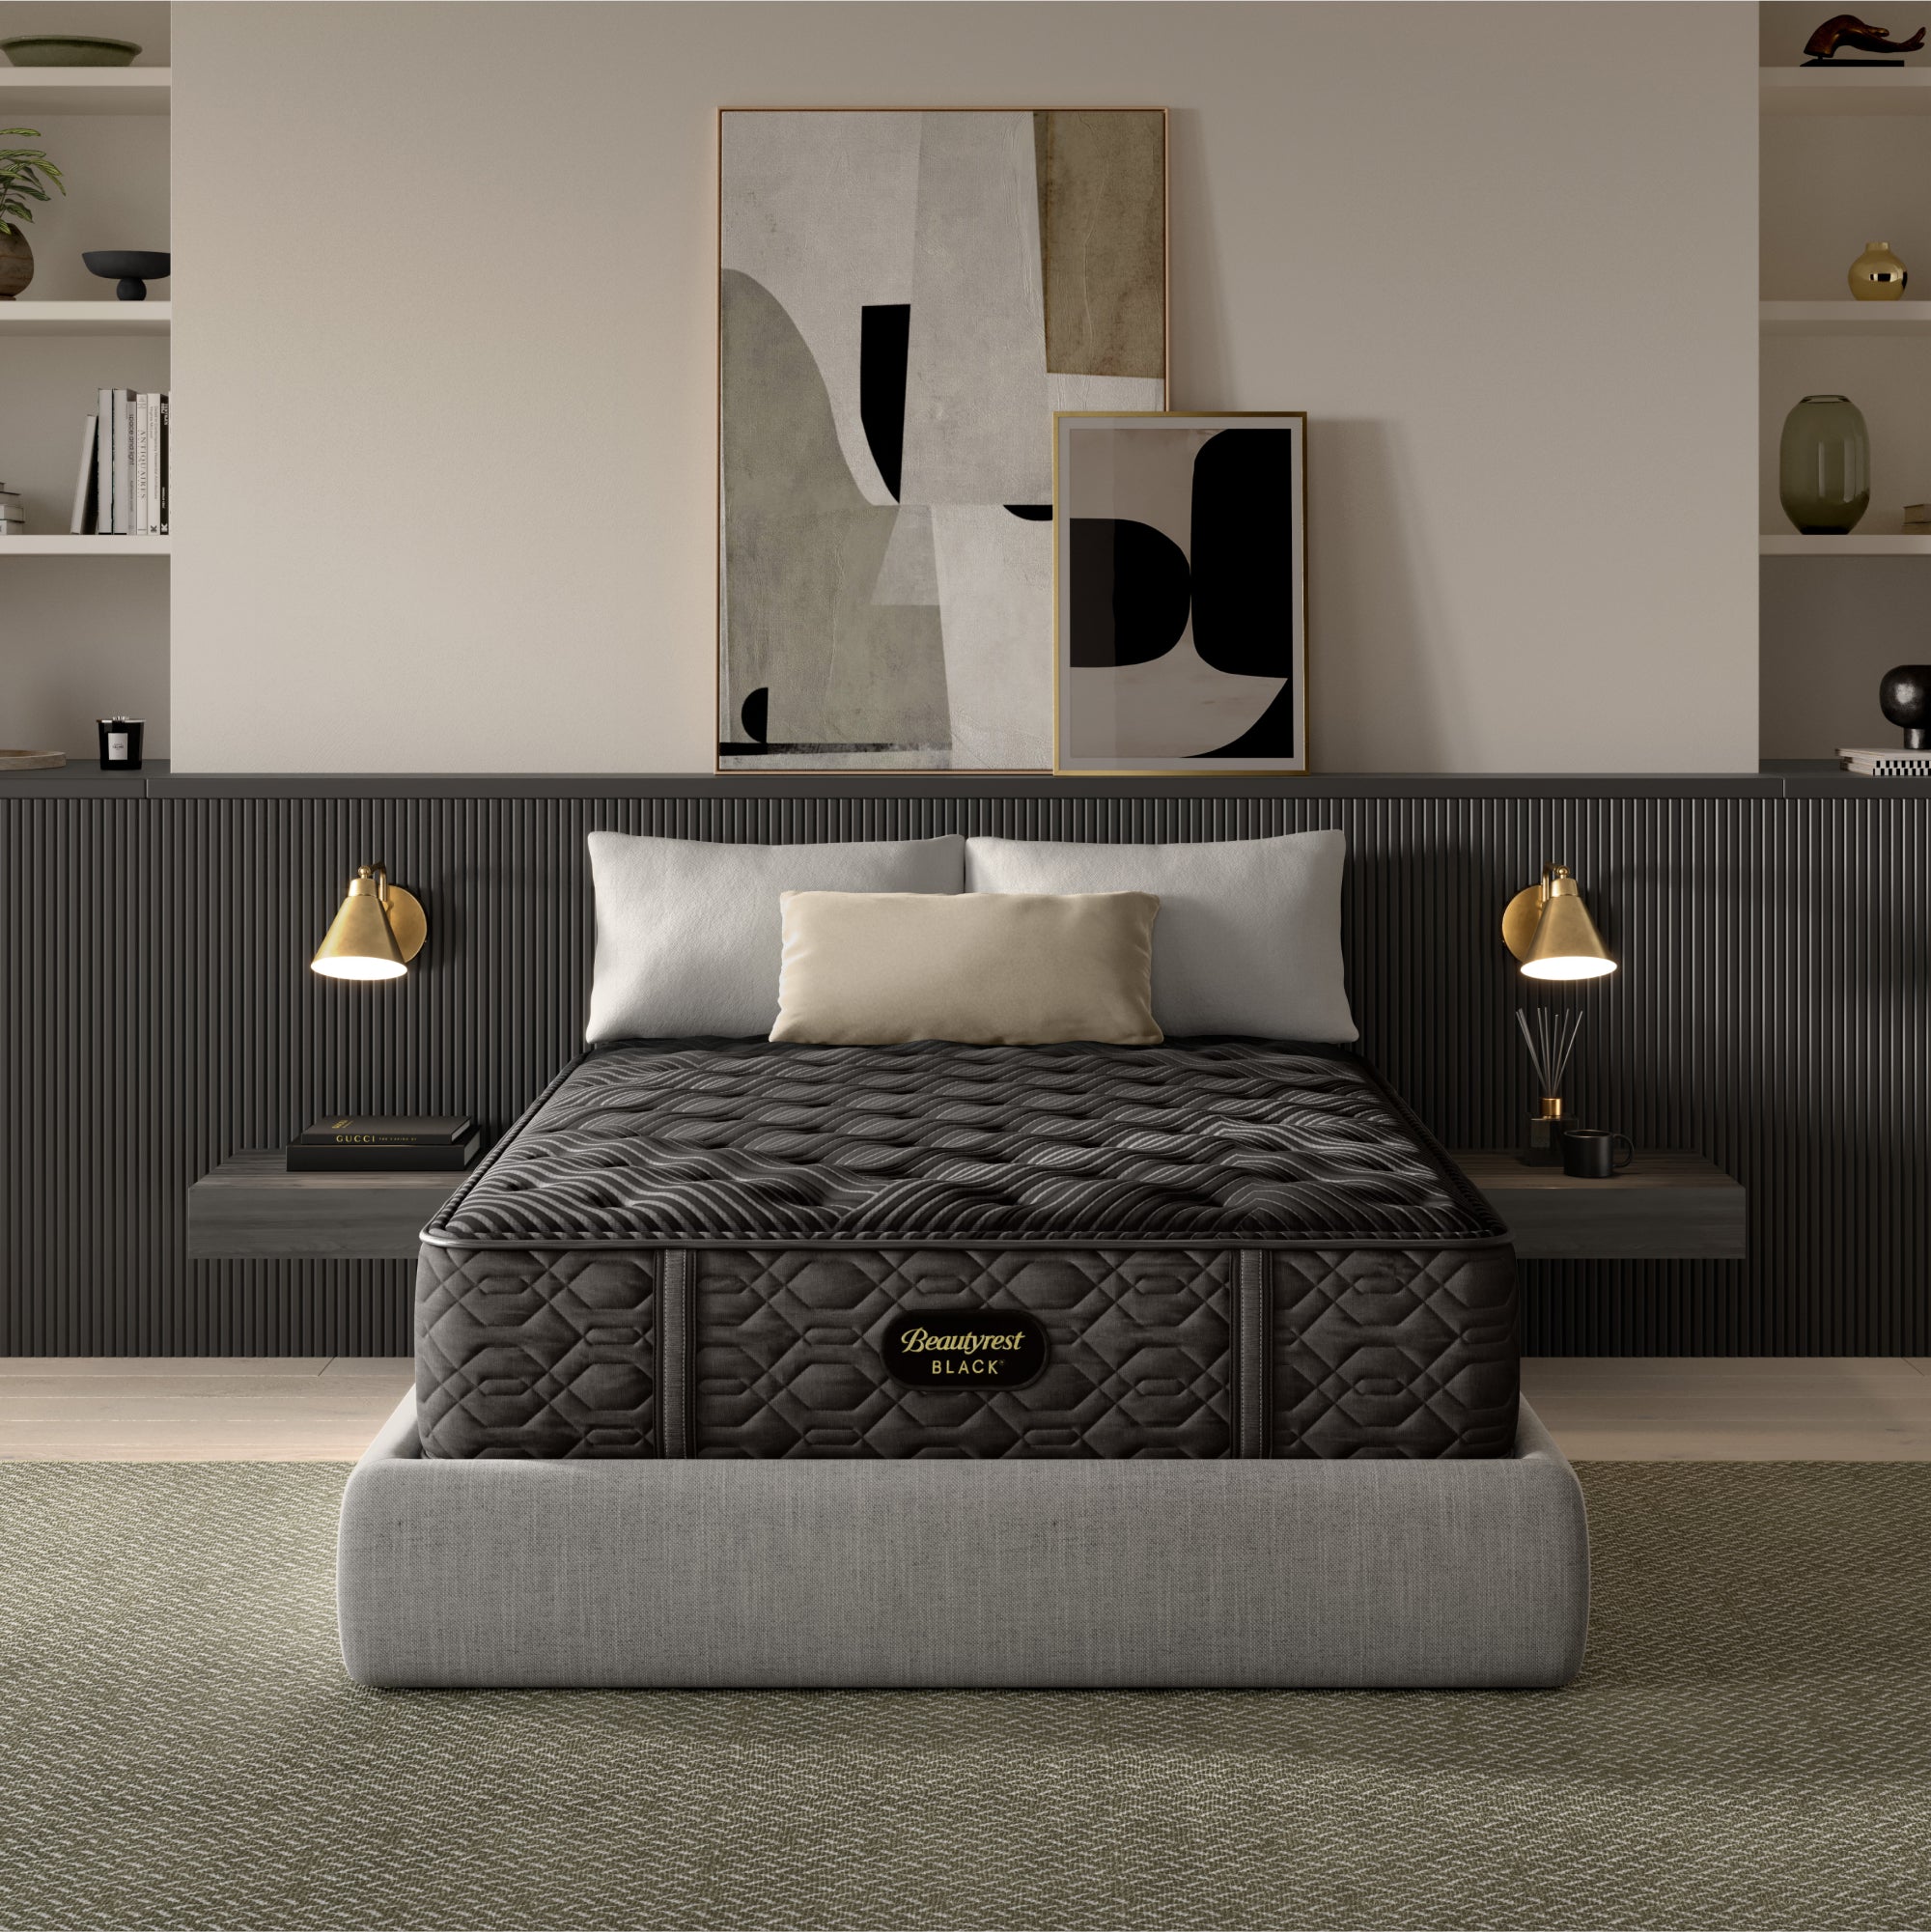 The Beautyrest Black plush mattress in a bedroom on a light grey bed frame || series: Series One || feel: plush